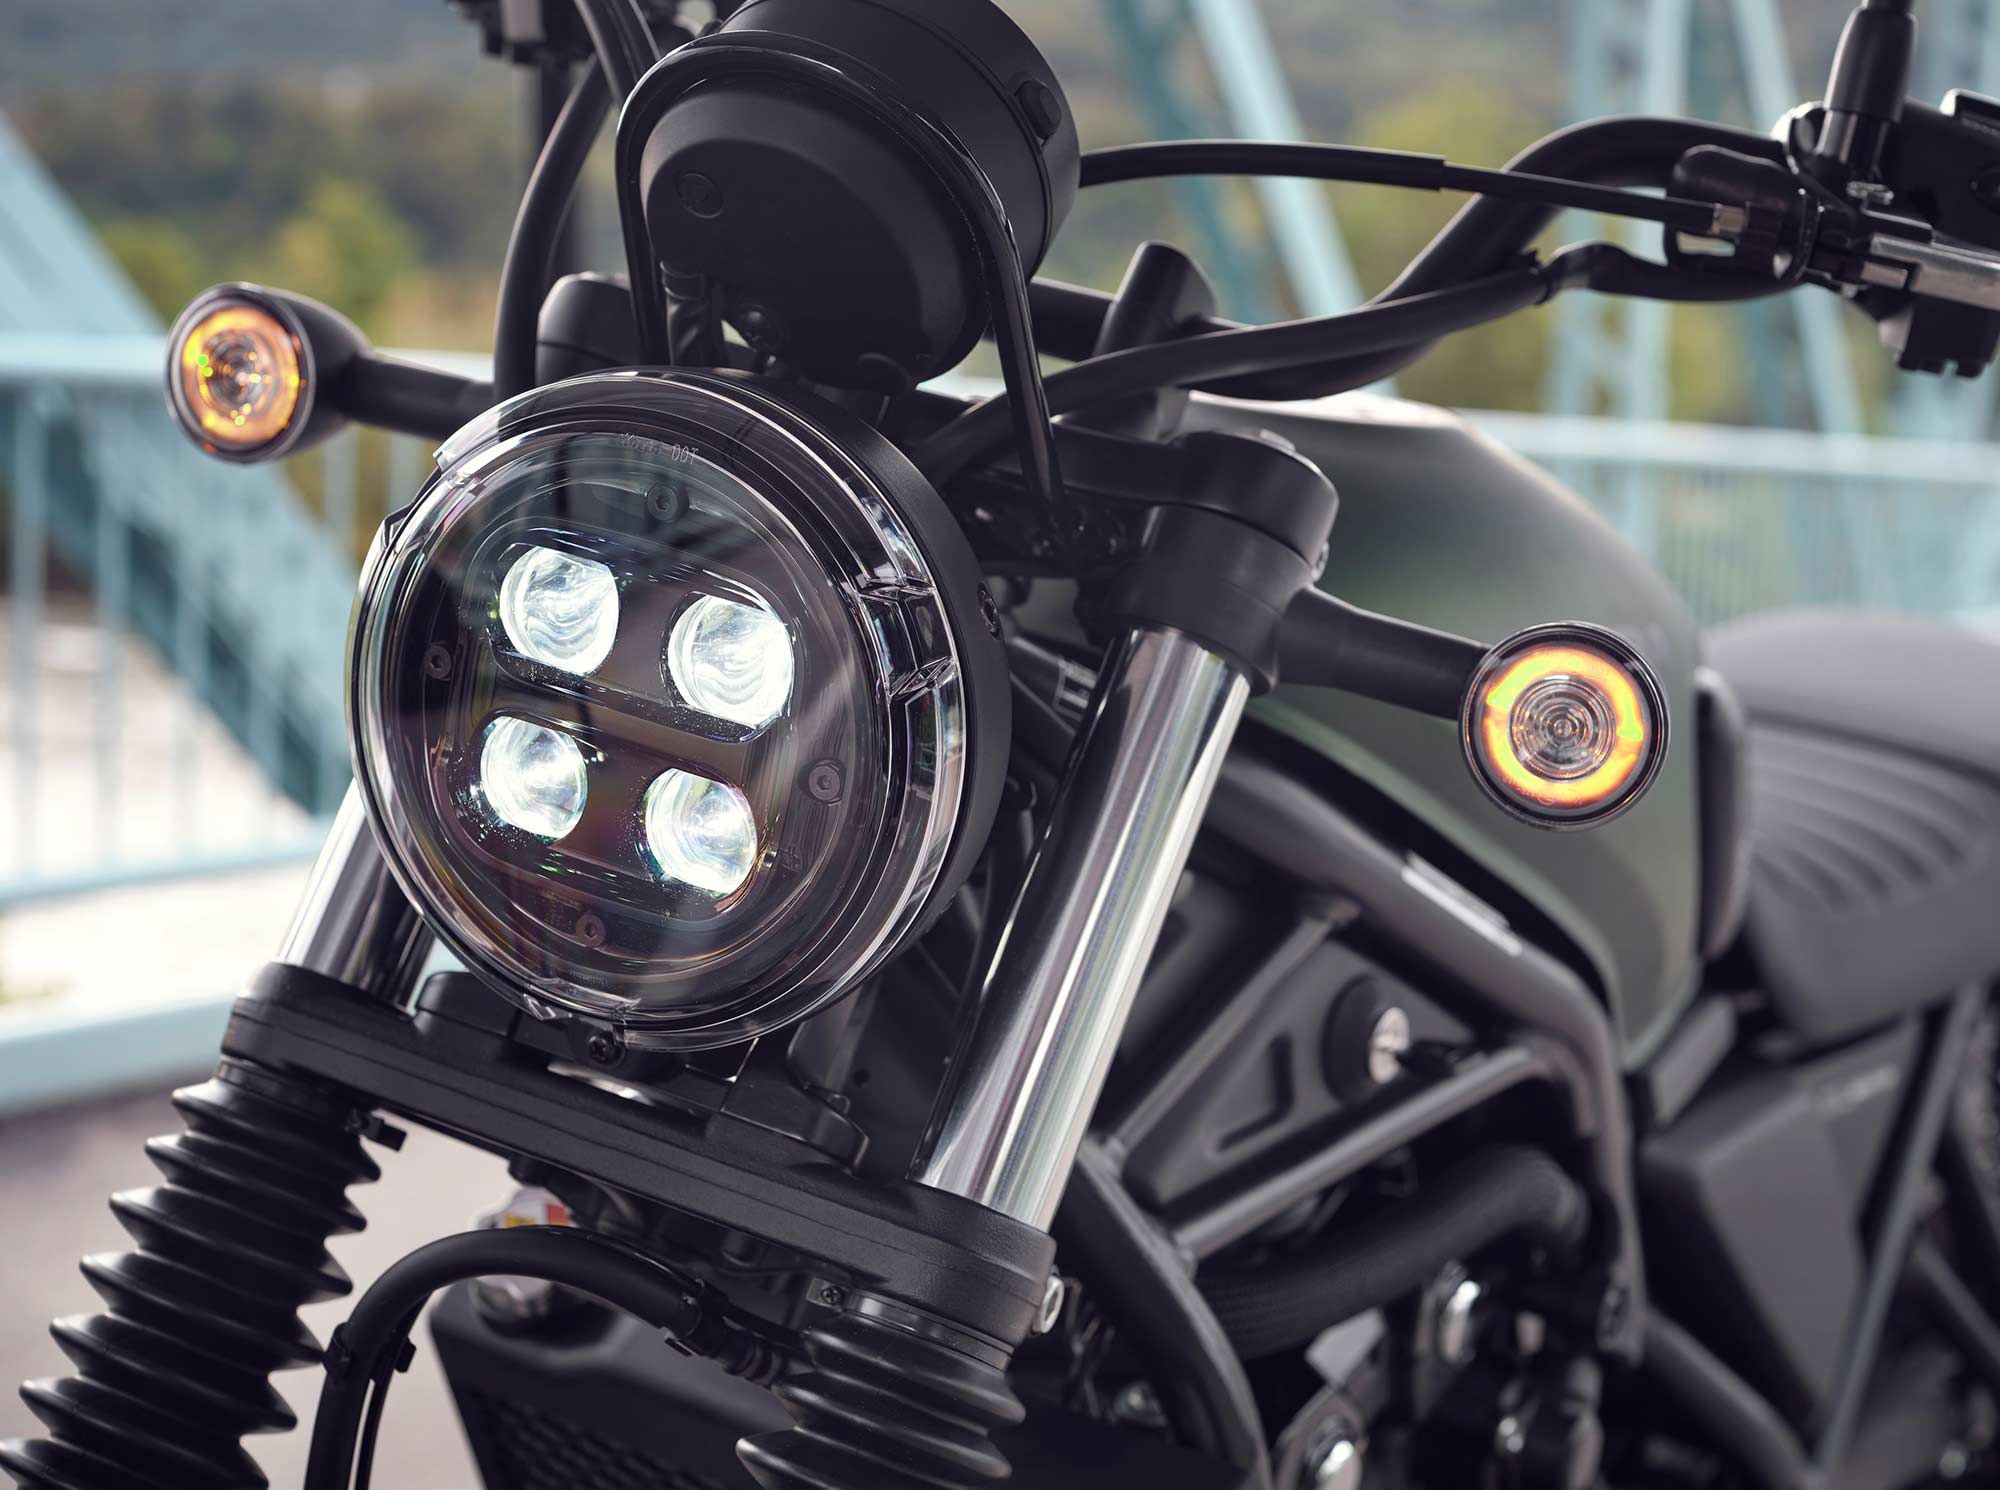 The circular headlight features four LED bulbs and is borrowed from the Rebel 500.